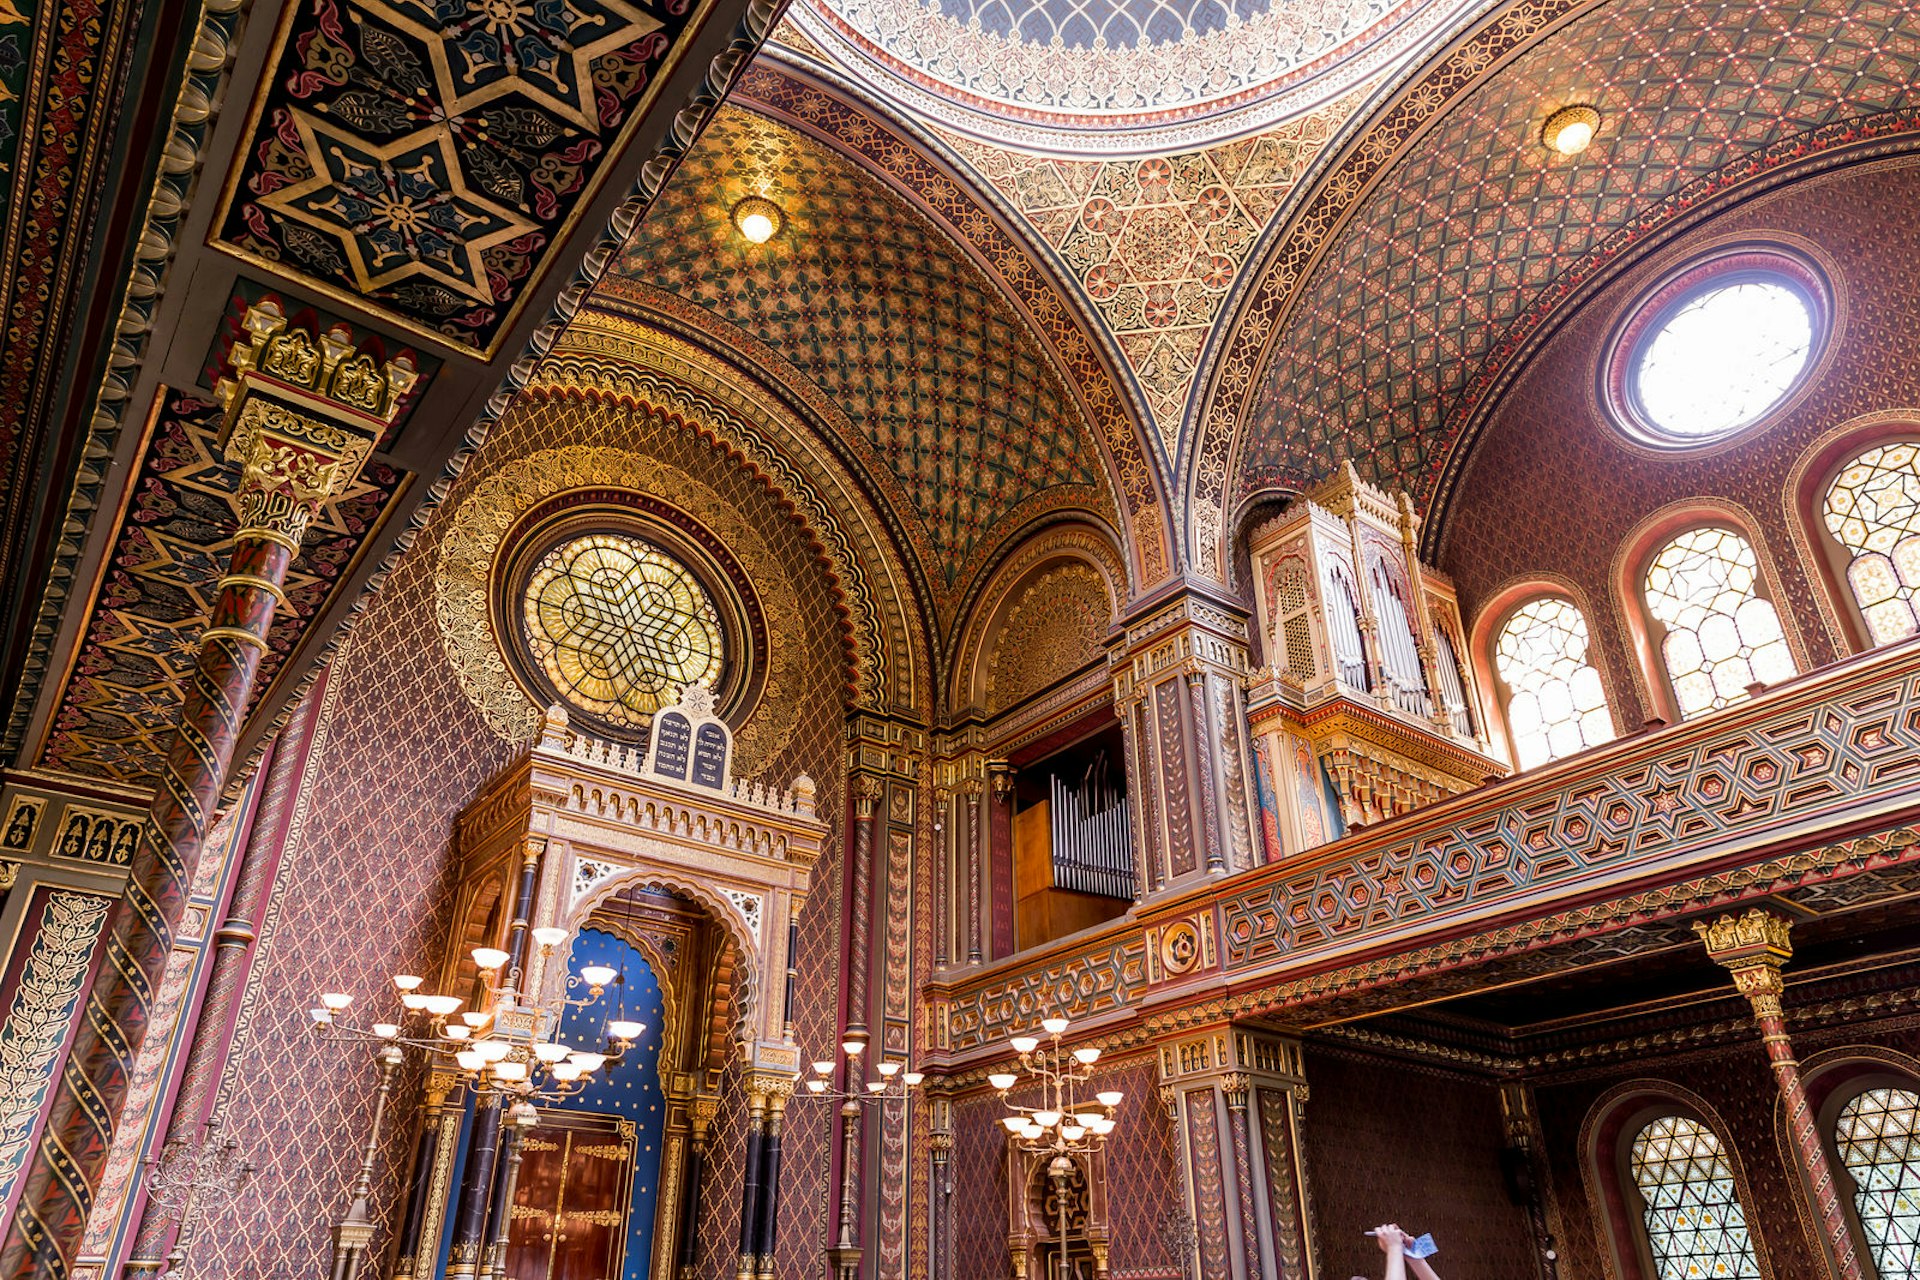 An incredible ornate interior of the Spanish Synagogue, with rich red tones mixed with elaborate gilded elements, the Star of David being a prominent feature; a large circular dome sits high above rounded stained-glass windows